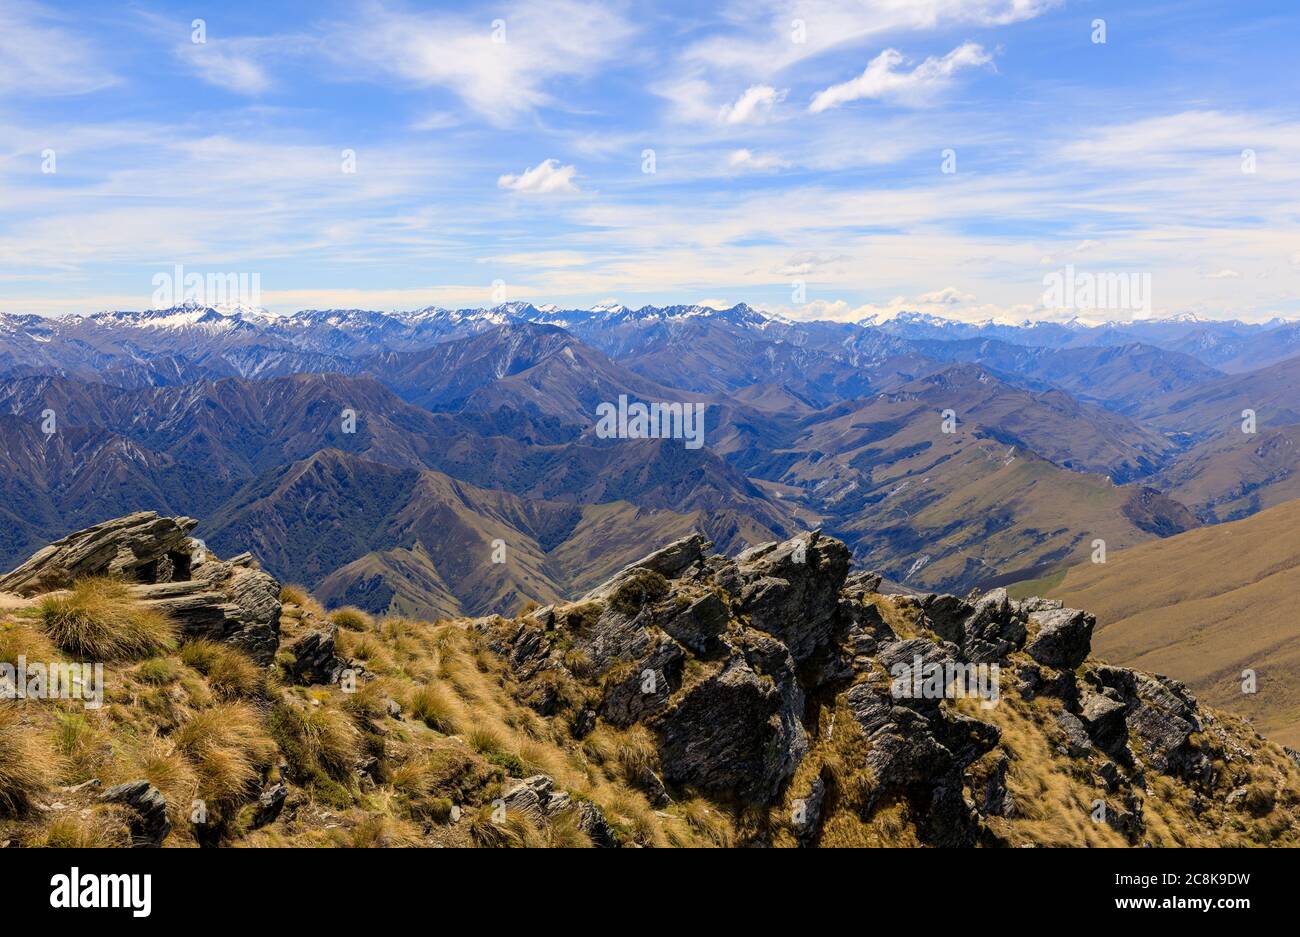 View of the Southern Alps from the climb up Ben Lomond. Tussocks and rocks in the foreground and snow-capped mountains in the background. Stock Photo